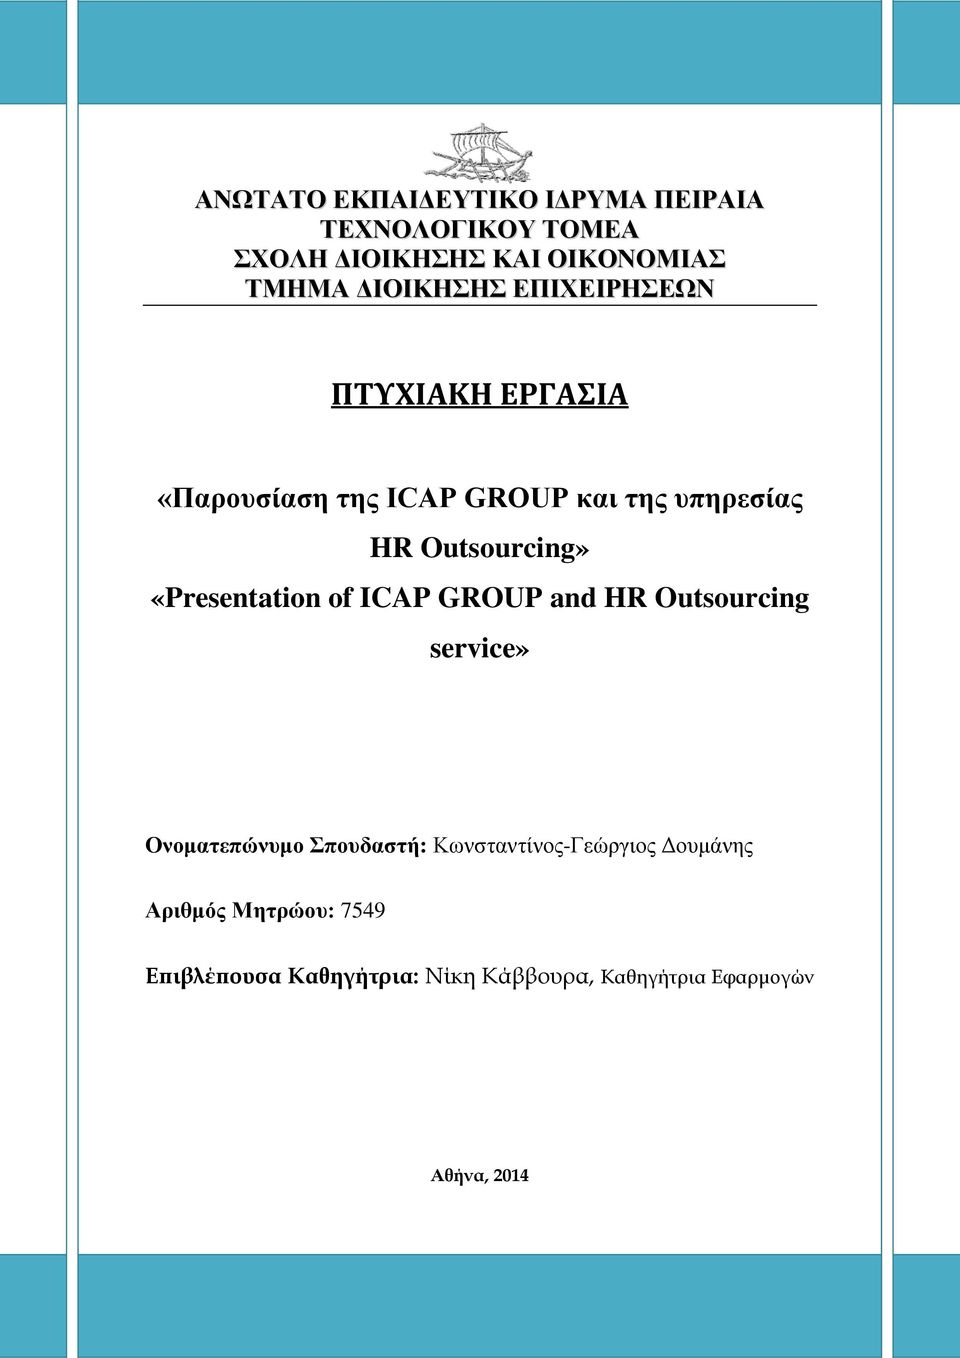 Outsourcing» «Presentation of ICAP GROUP and HR Outsourcing service» Ονοματεπώνυμο Σπουδαστή: